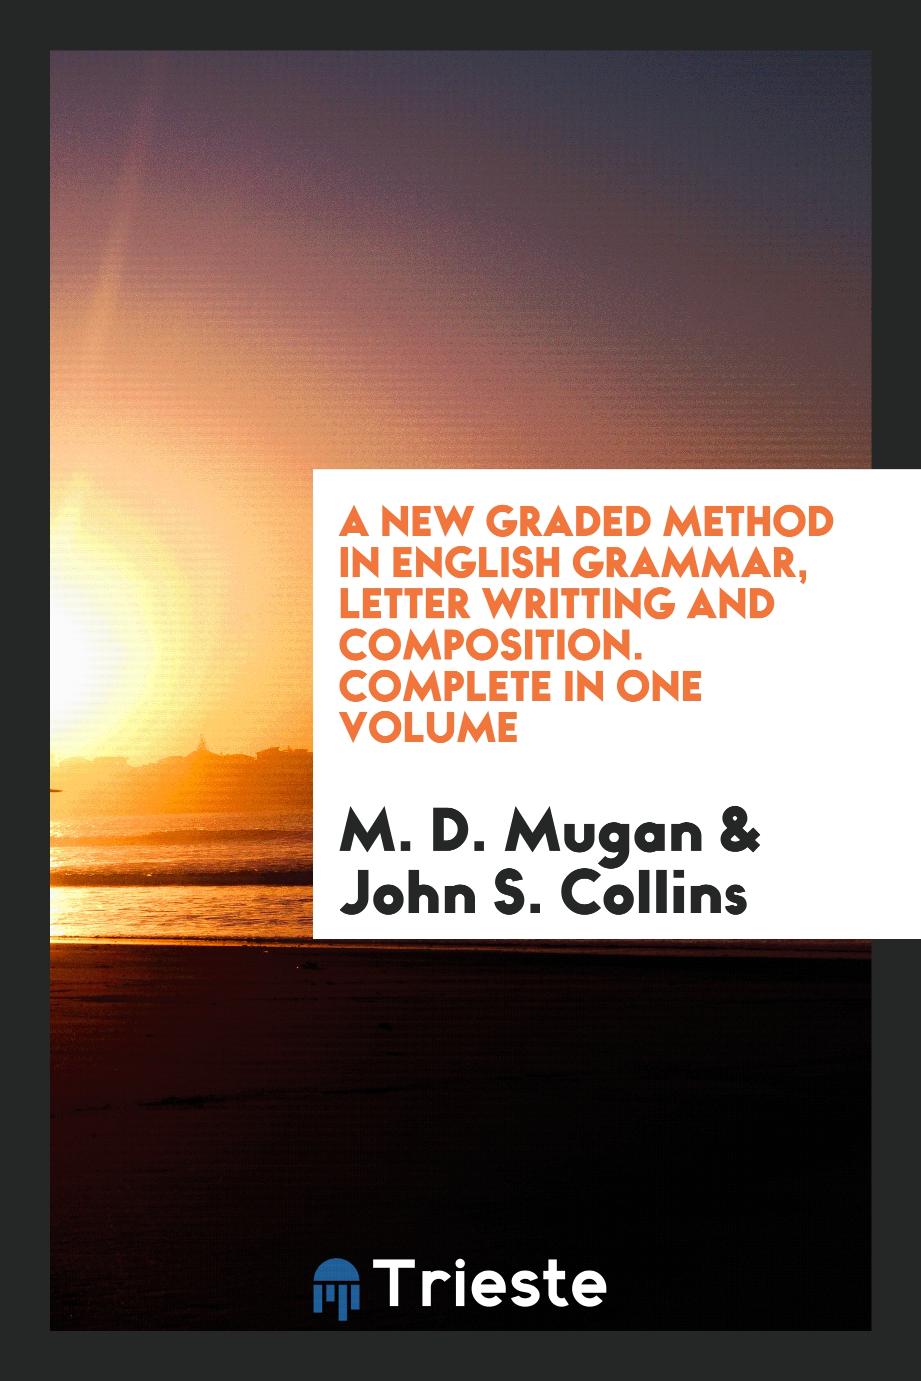 A New Graded Method in English Grammar, Letter writting and composition. Complete in one volume